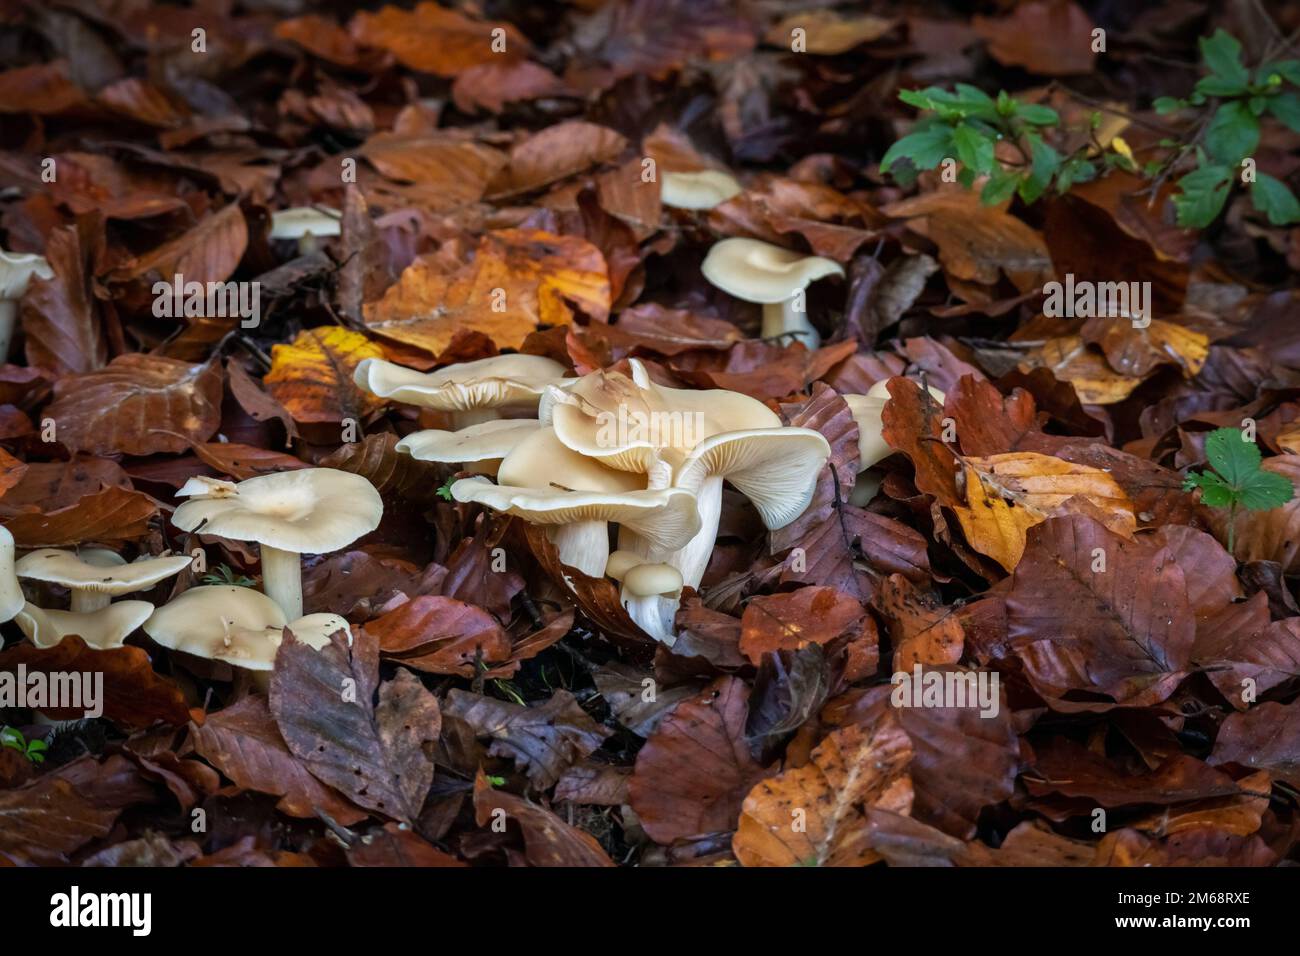 Psilocybin magic mushrooms growing in forest. Naturally psychoactive and hallucinogenic compound concept. Stock Photo